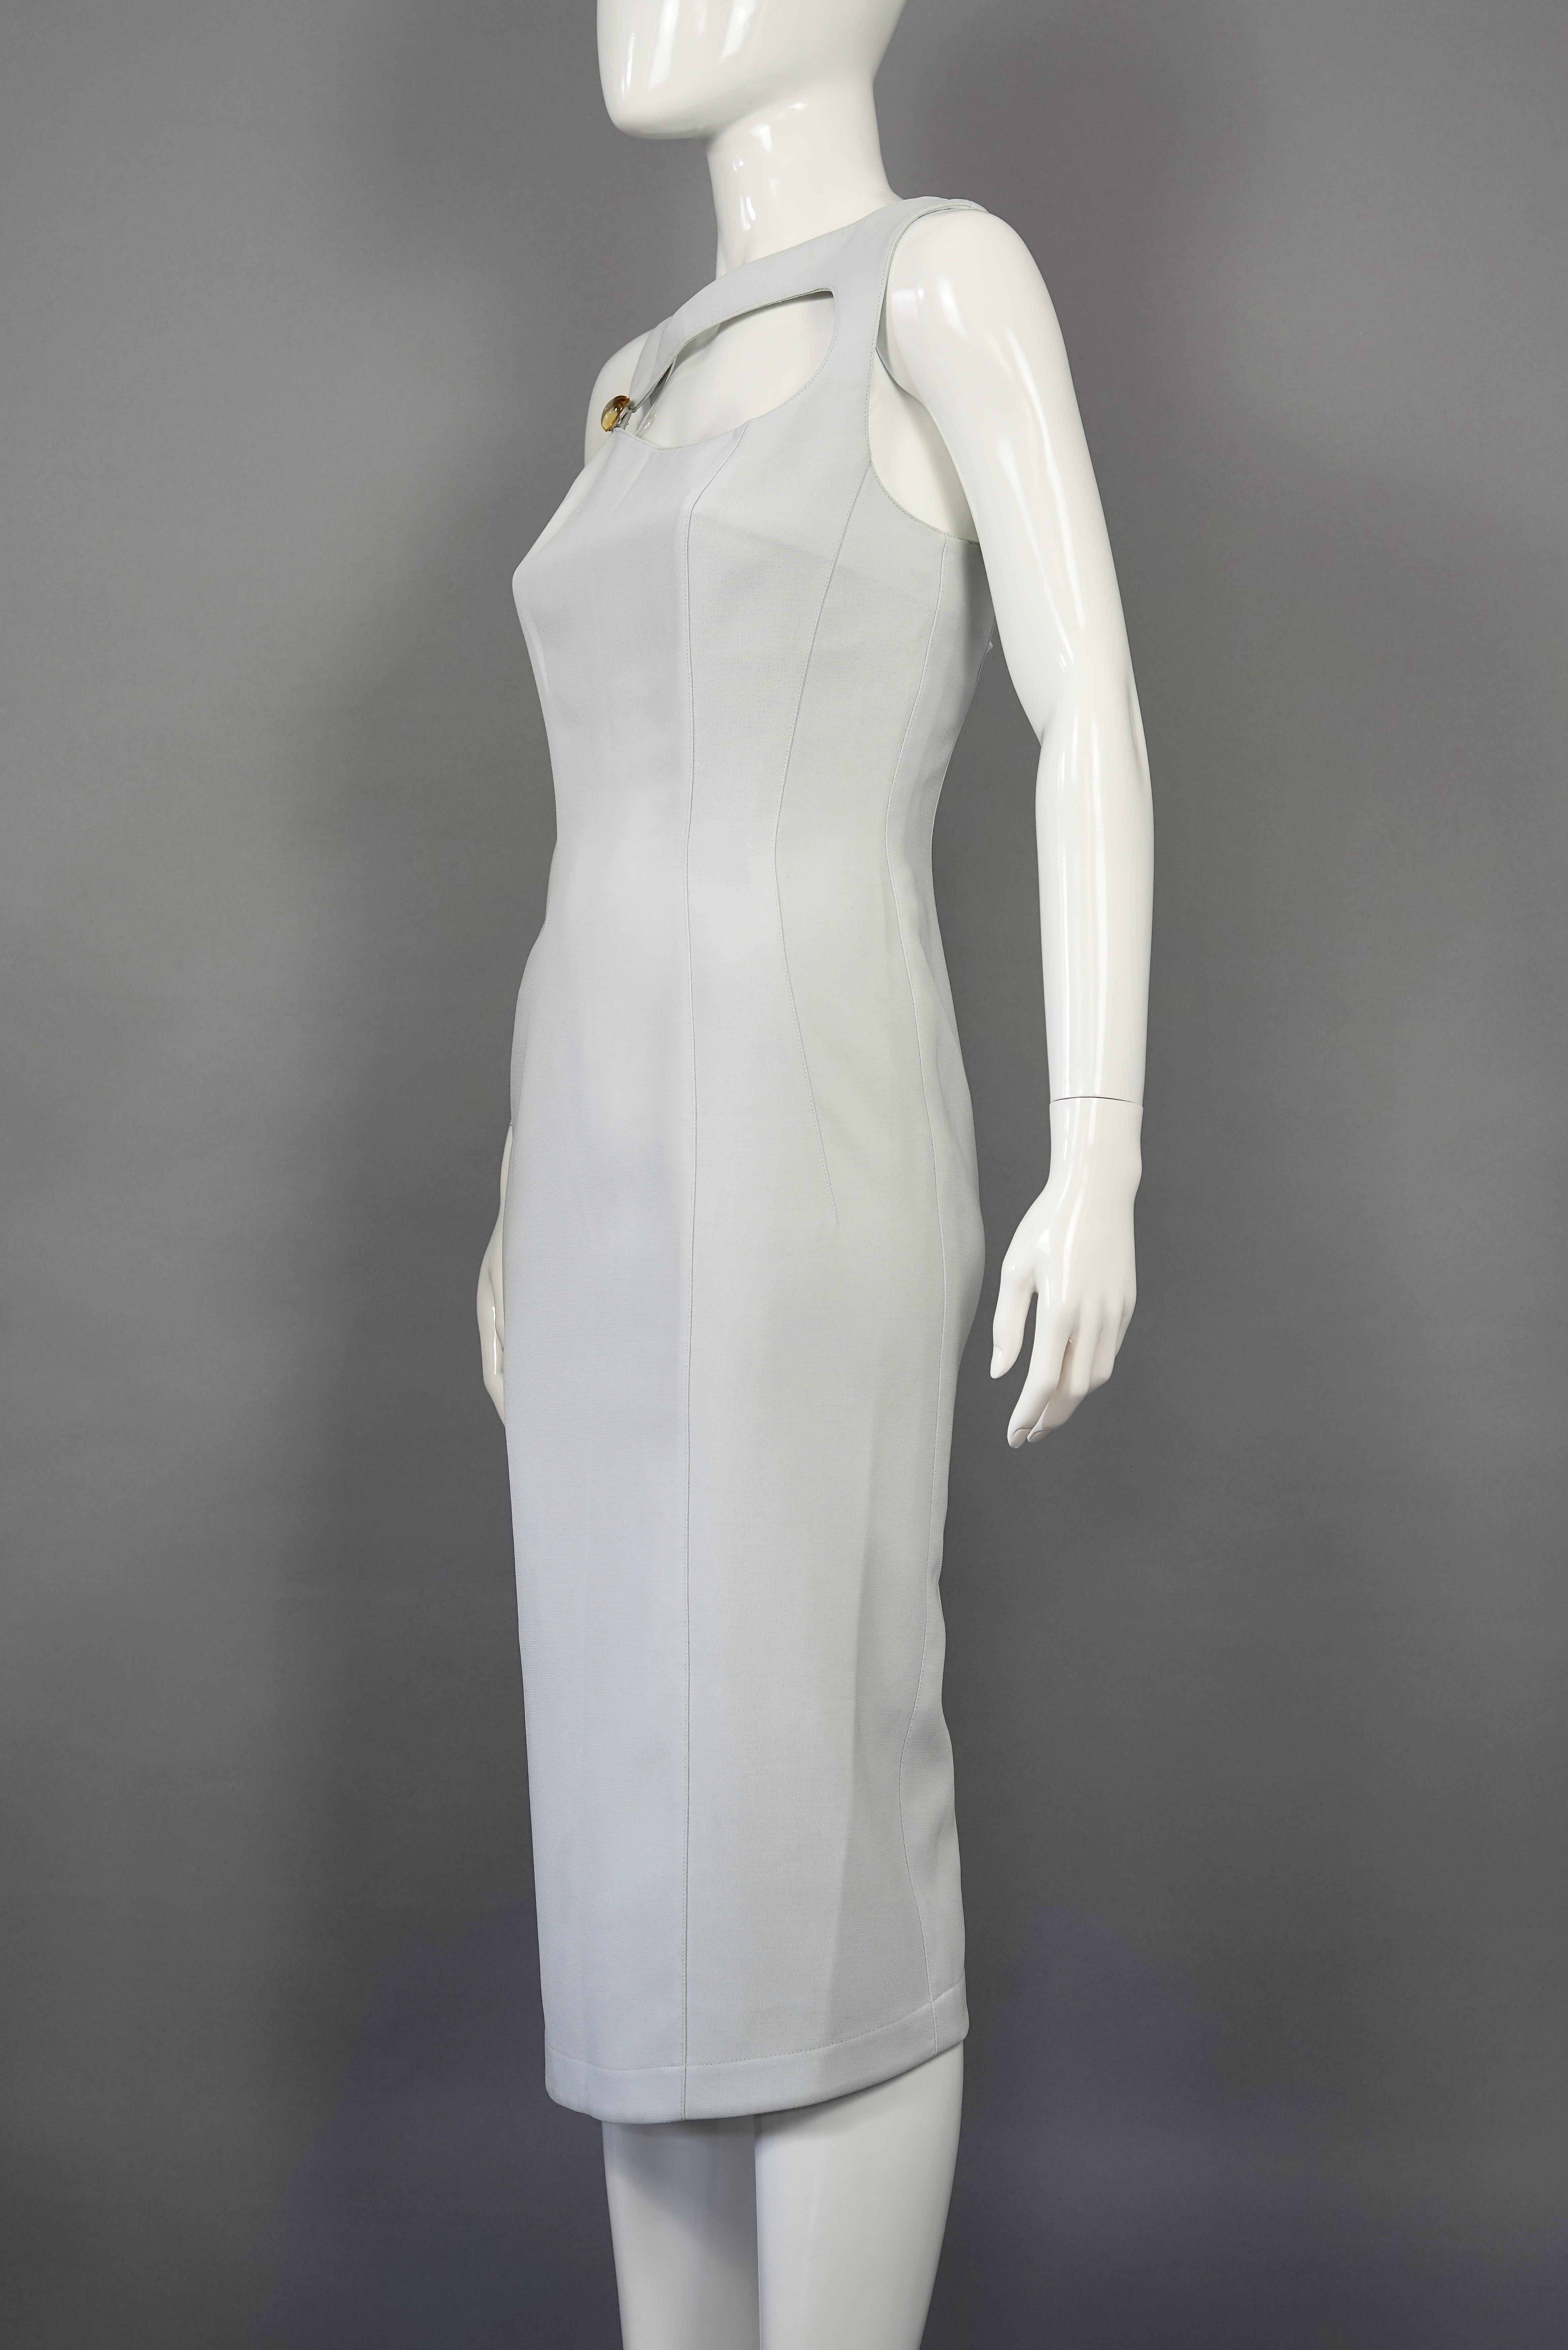 Vintage THIERRY MUGLER Jeweled Cut Out Neckline Dress In Excellent Condition For Sale In Kingersheim, Alsace